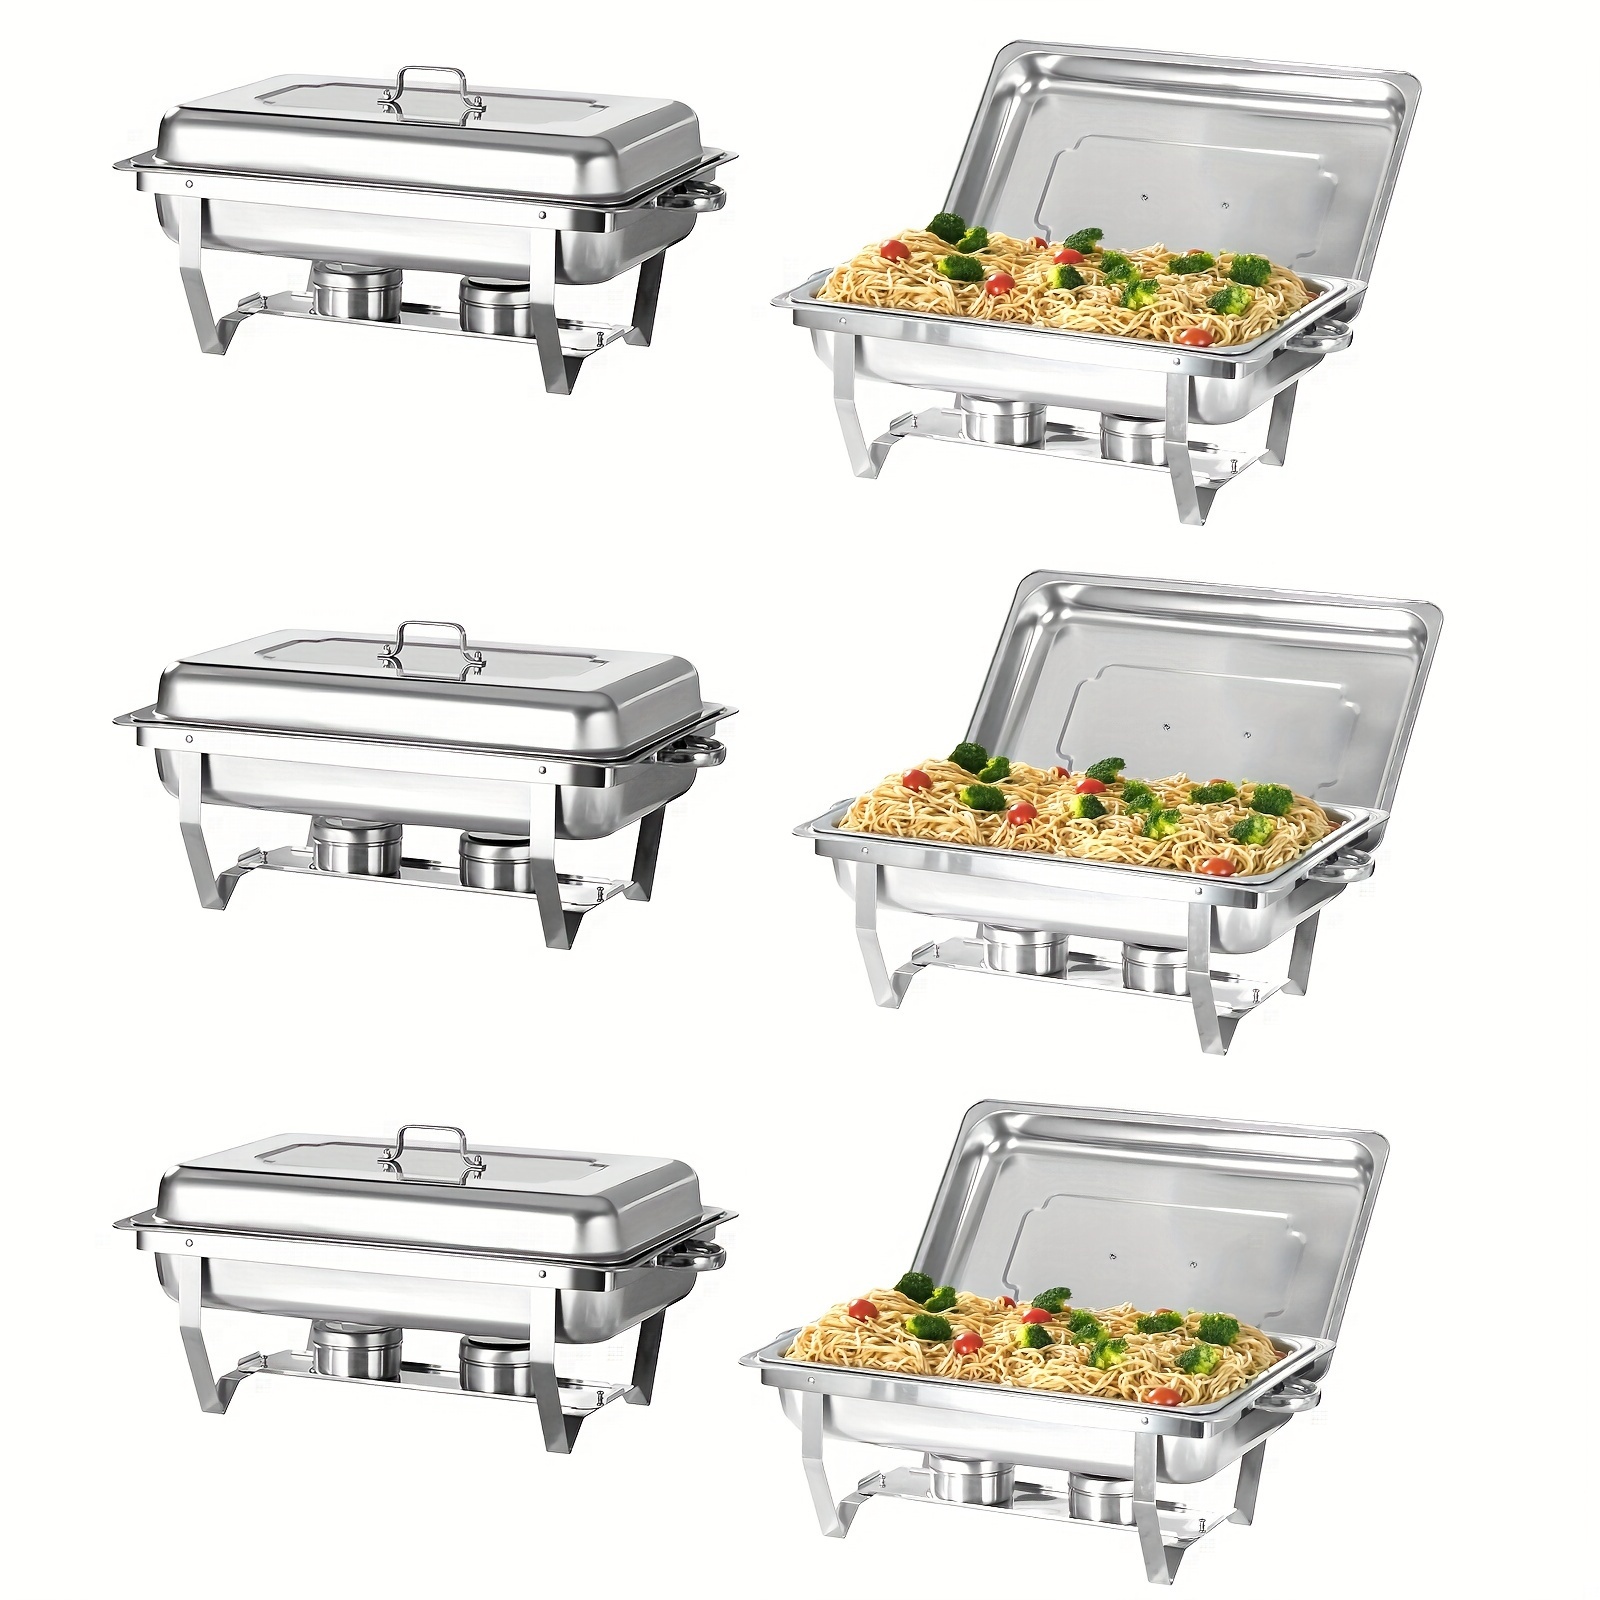 

6 Packs 8qt Full Size Chafing Dish Buffet Set, Rectangular Stainless Steel Food Warmer Sets With Lids, Food Pans, Water Pan And Fuel Holders For Restaurant Catering Parties Weddings